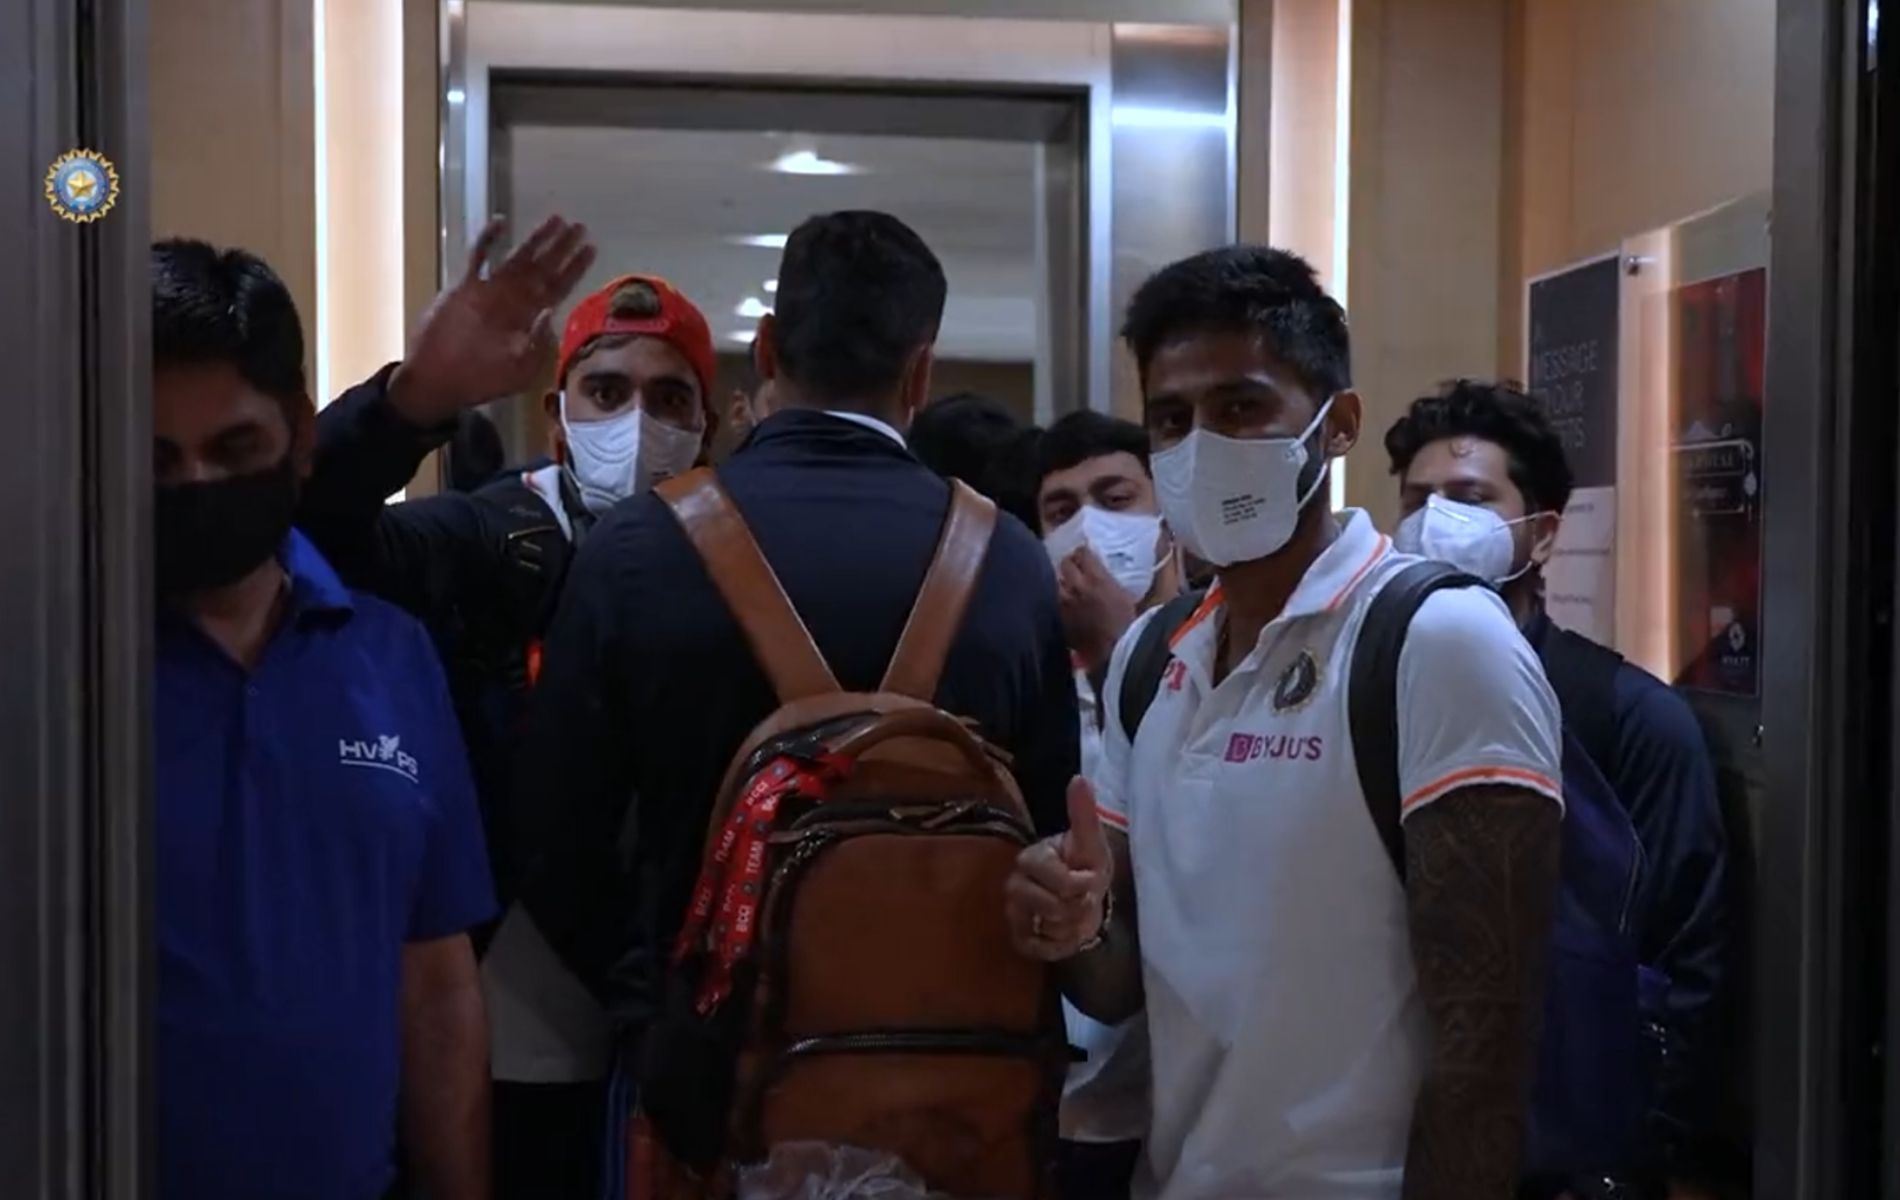 The Indian team at their hotel in Lucknow.